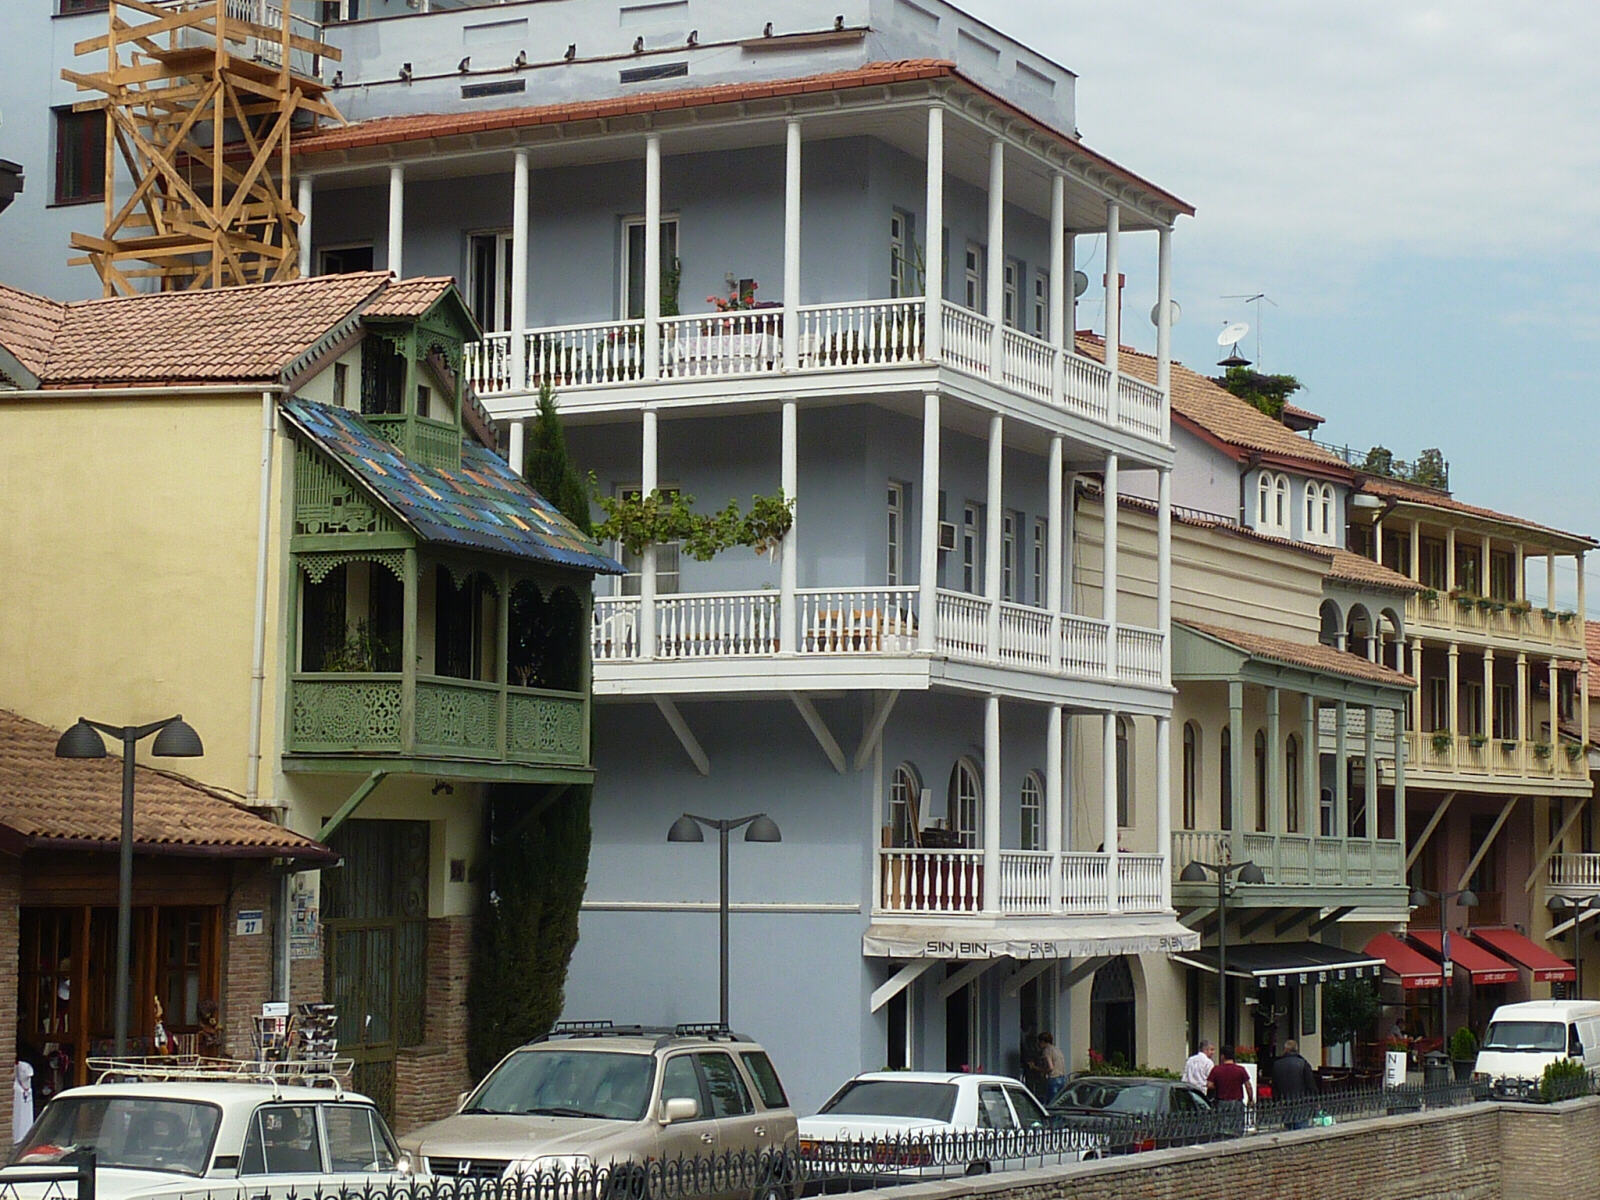 Houses with wooden balconies in Tblisi, Georgia